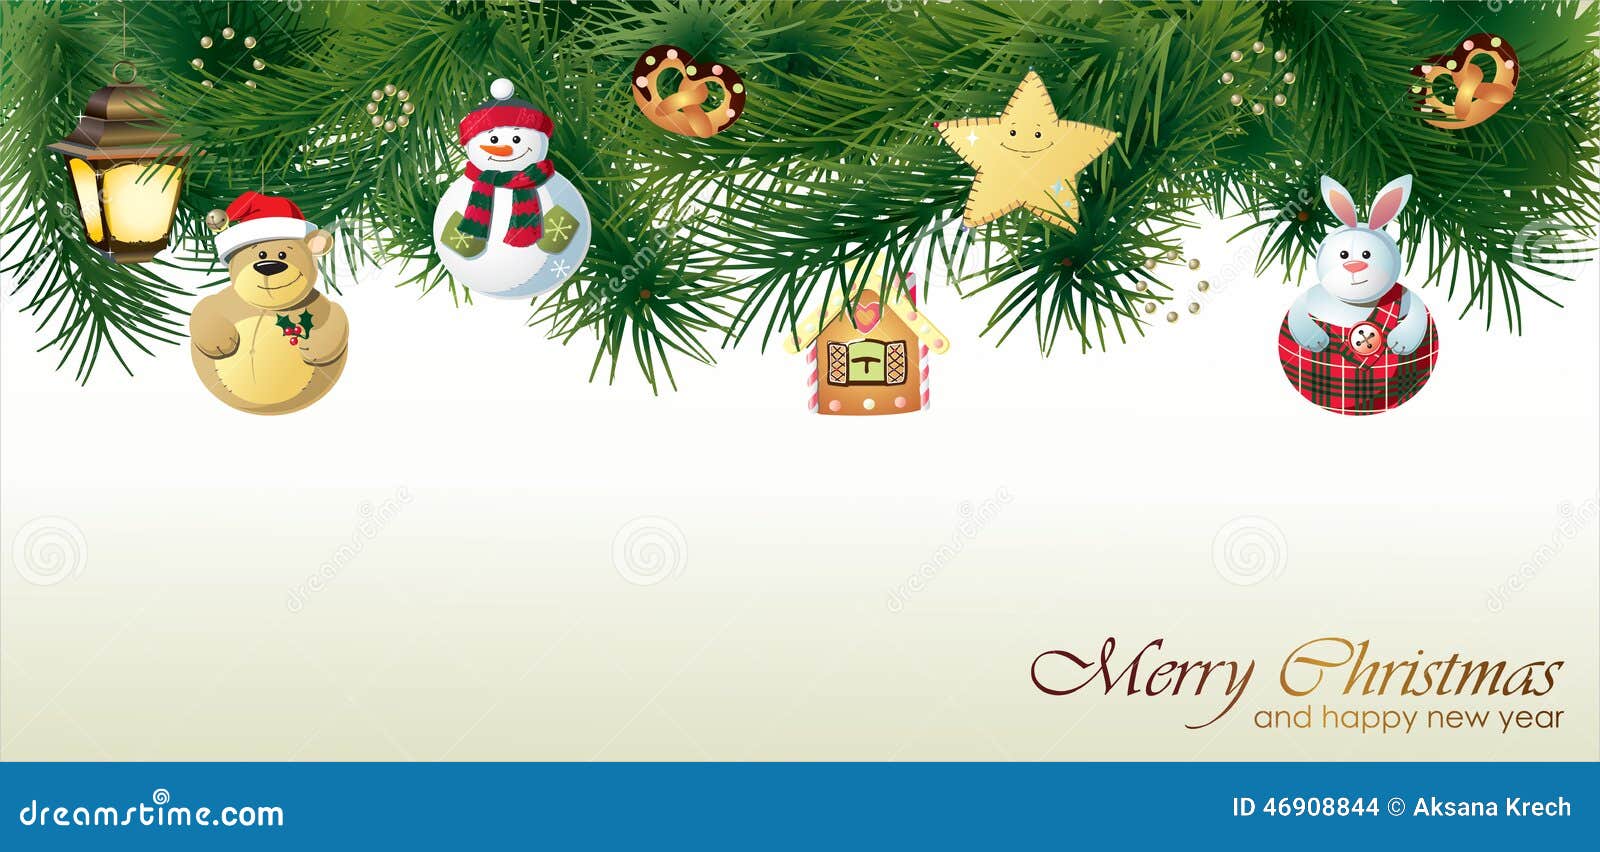 Awesome Merry Christmas and Happy New Year Cards Images